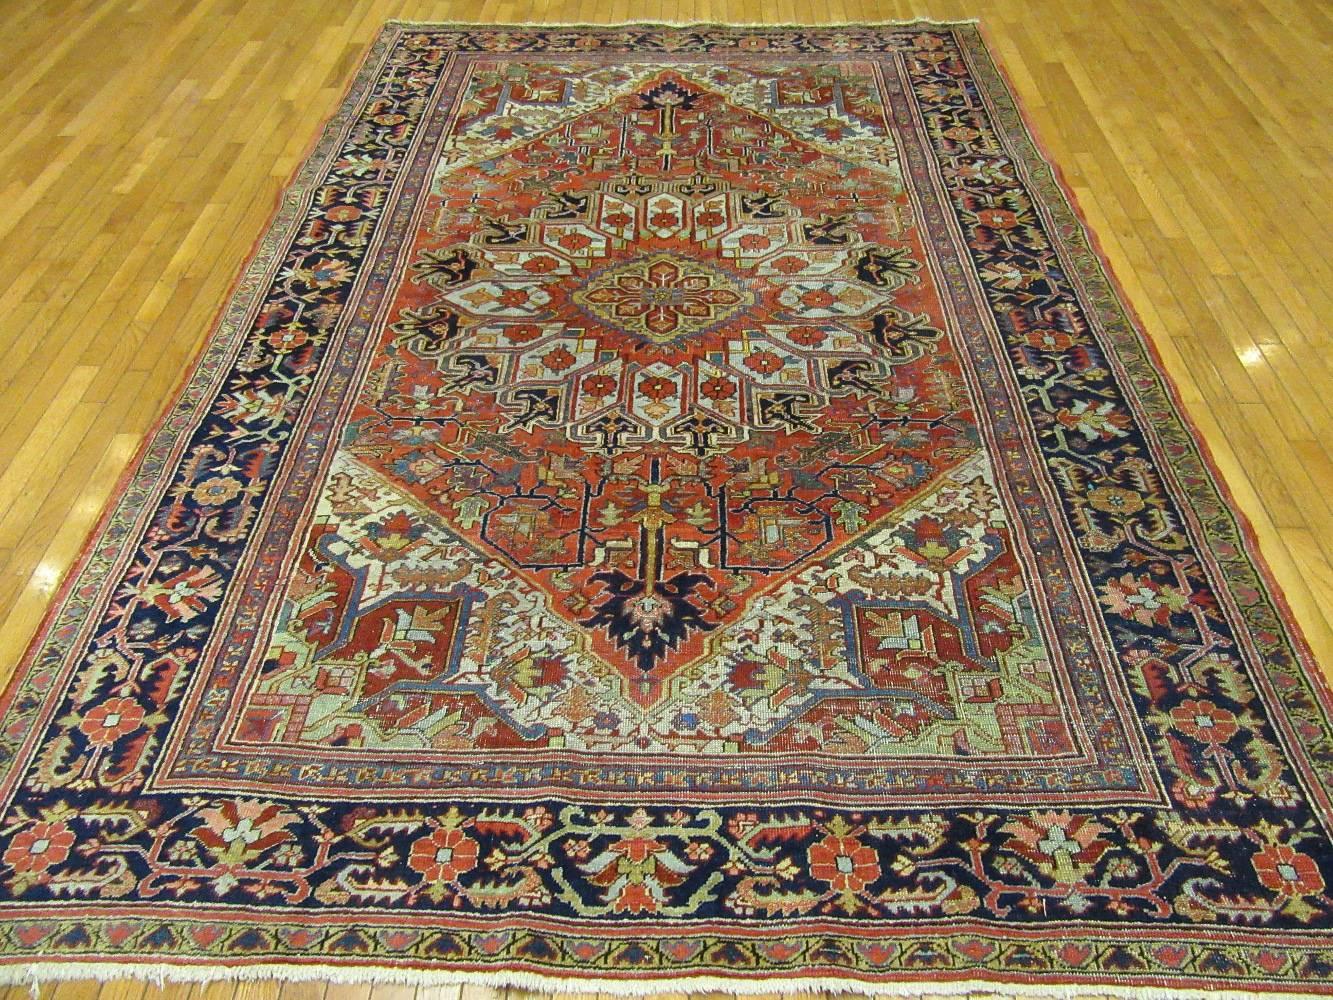 This is an antique hand-knotted rug from the infamous village of Heriz in northwest Iran (Persian).
This rug has the primary colors and a geometric central and corner medallion Heriz design made with wool and natural dyes. A very useful size for